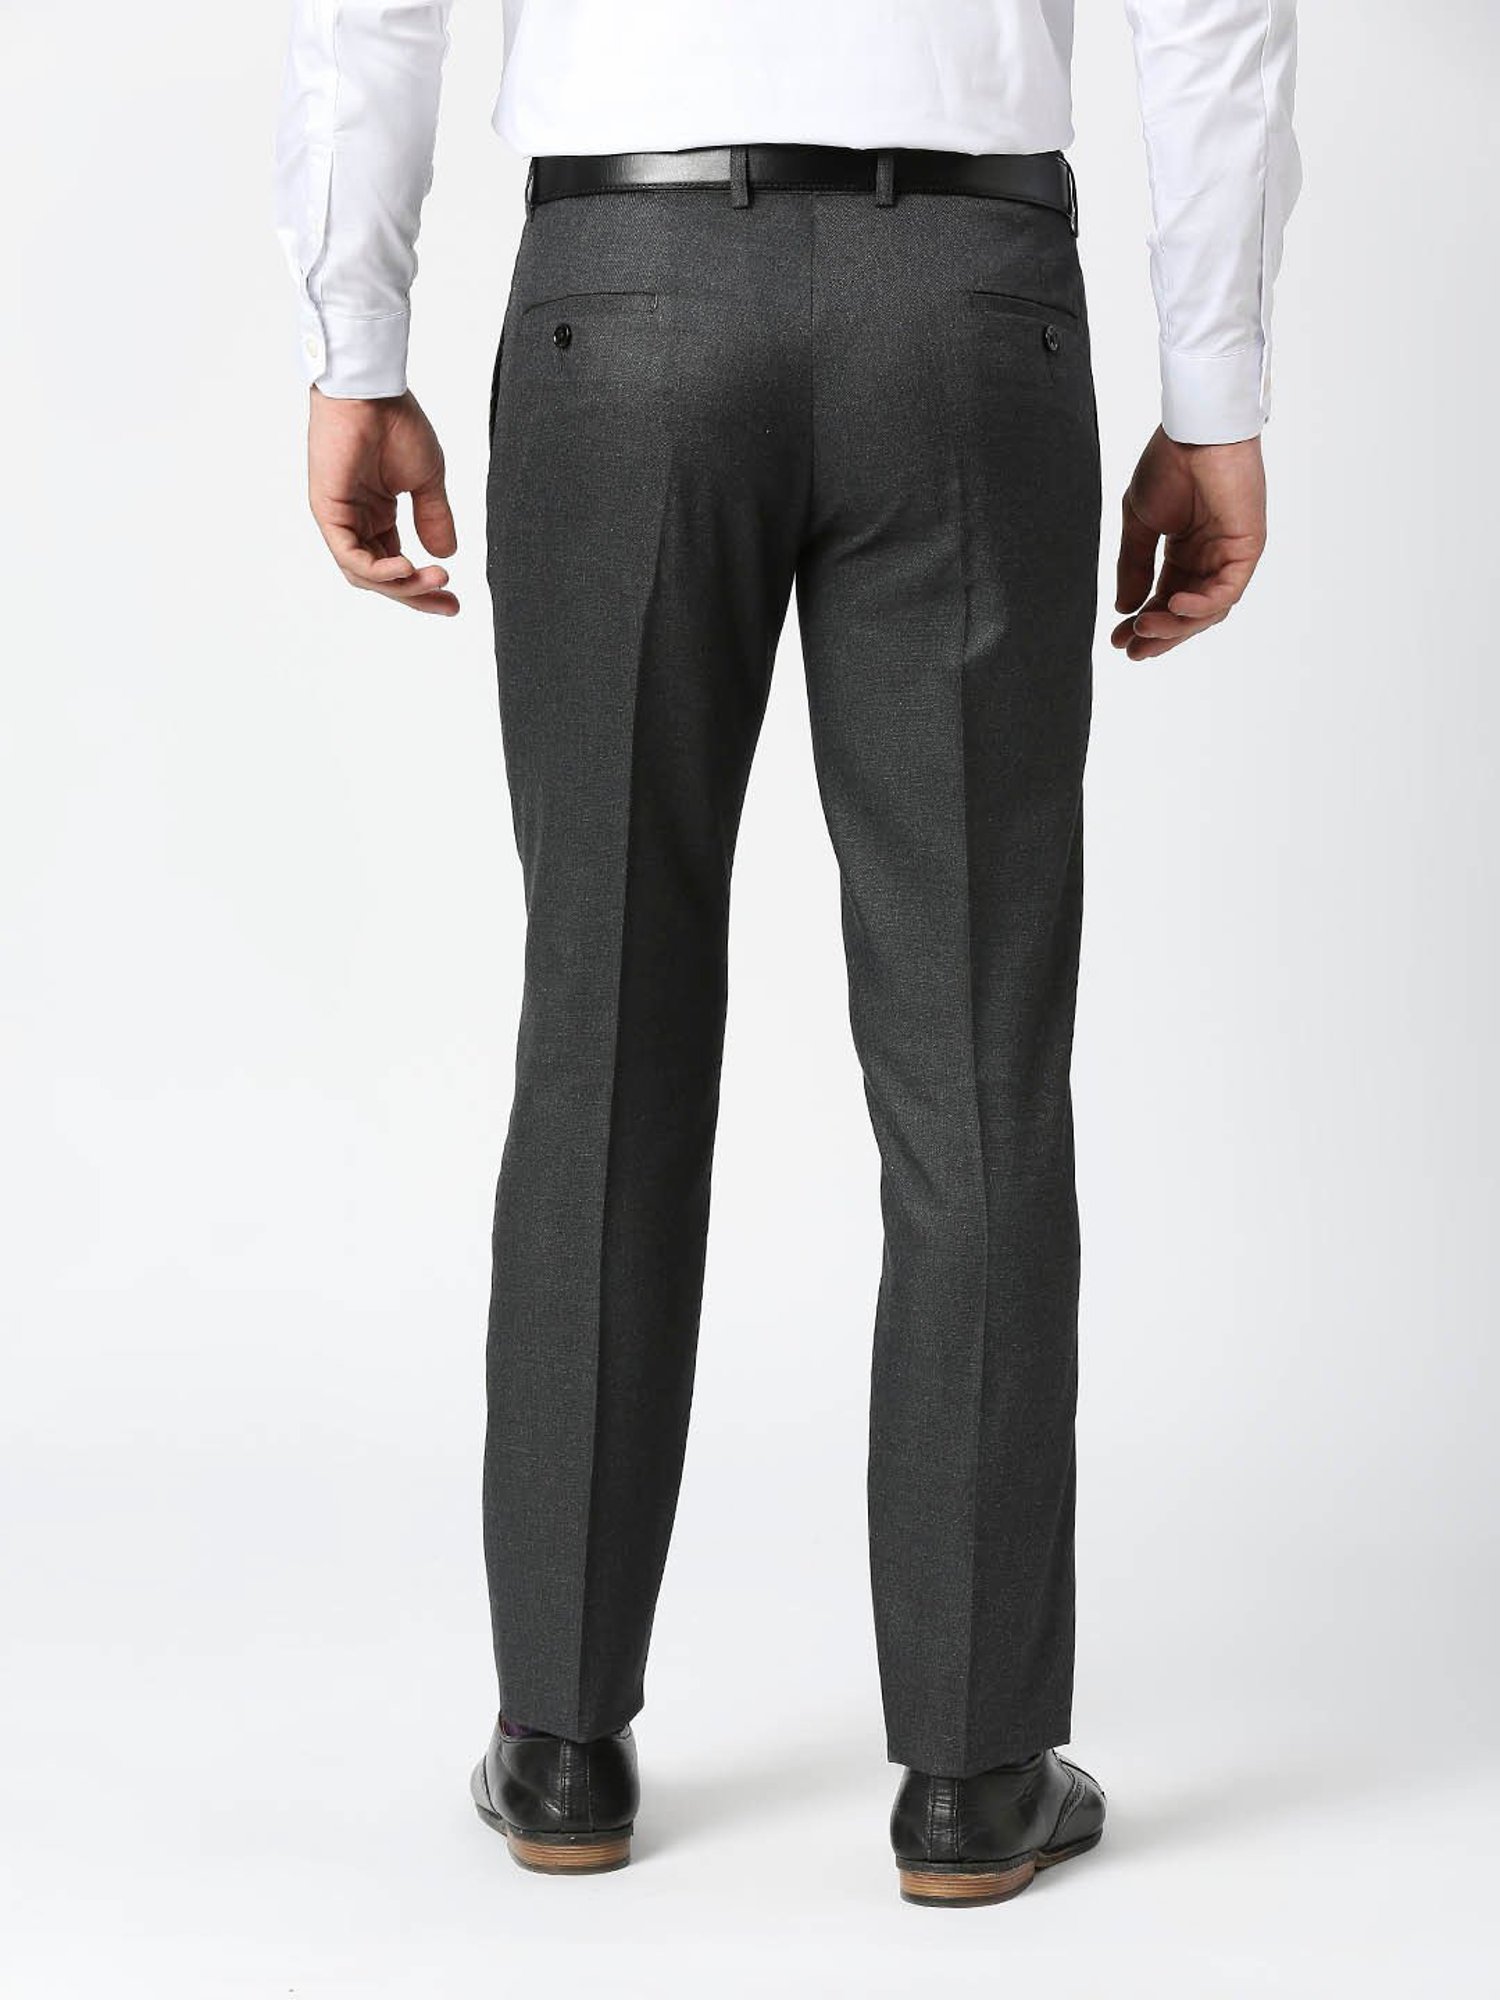 Racing Green | Charcoal Grey Texture Trousers | SuitDirect.co.uk